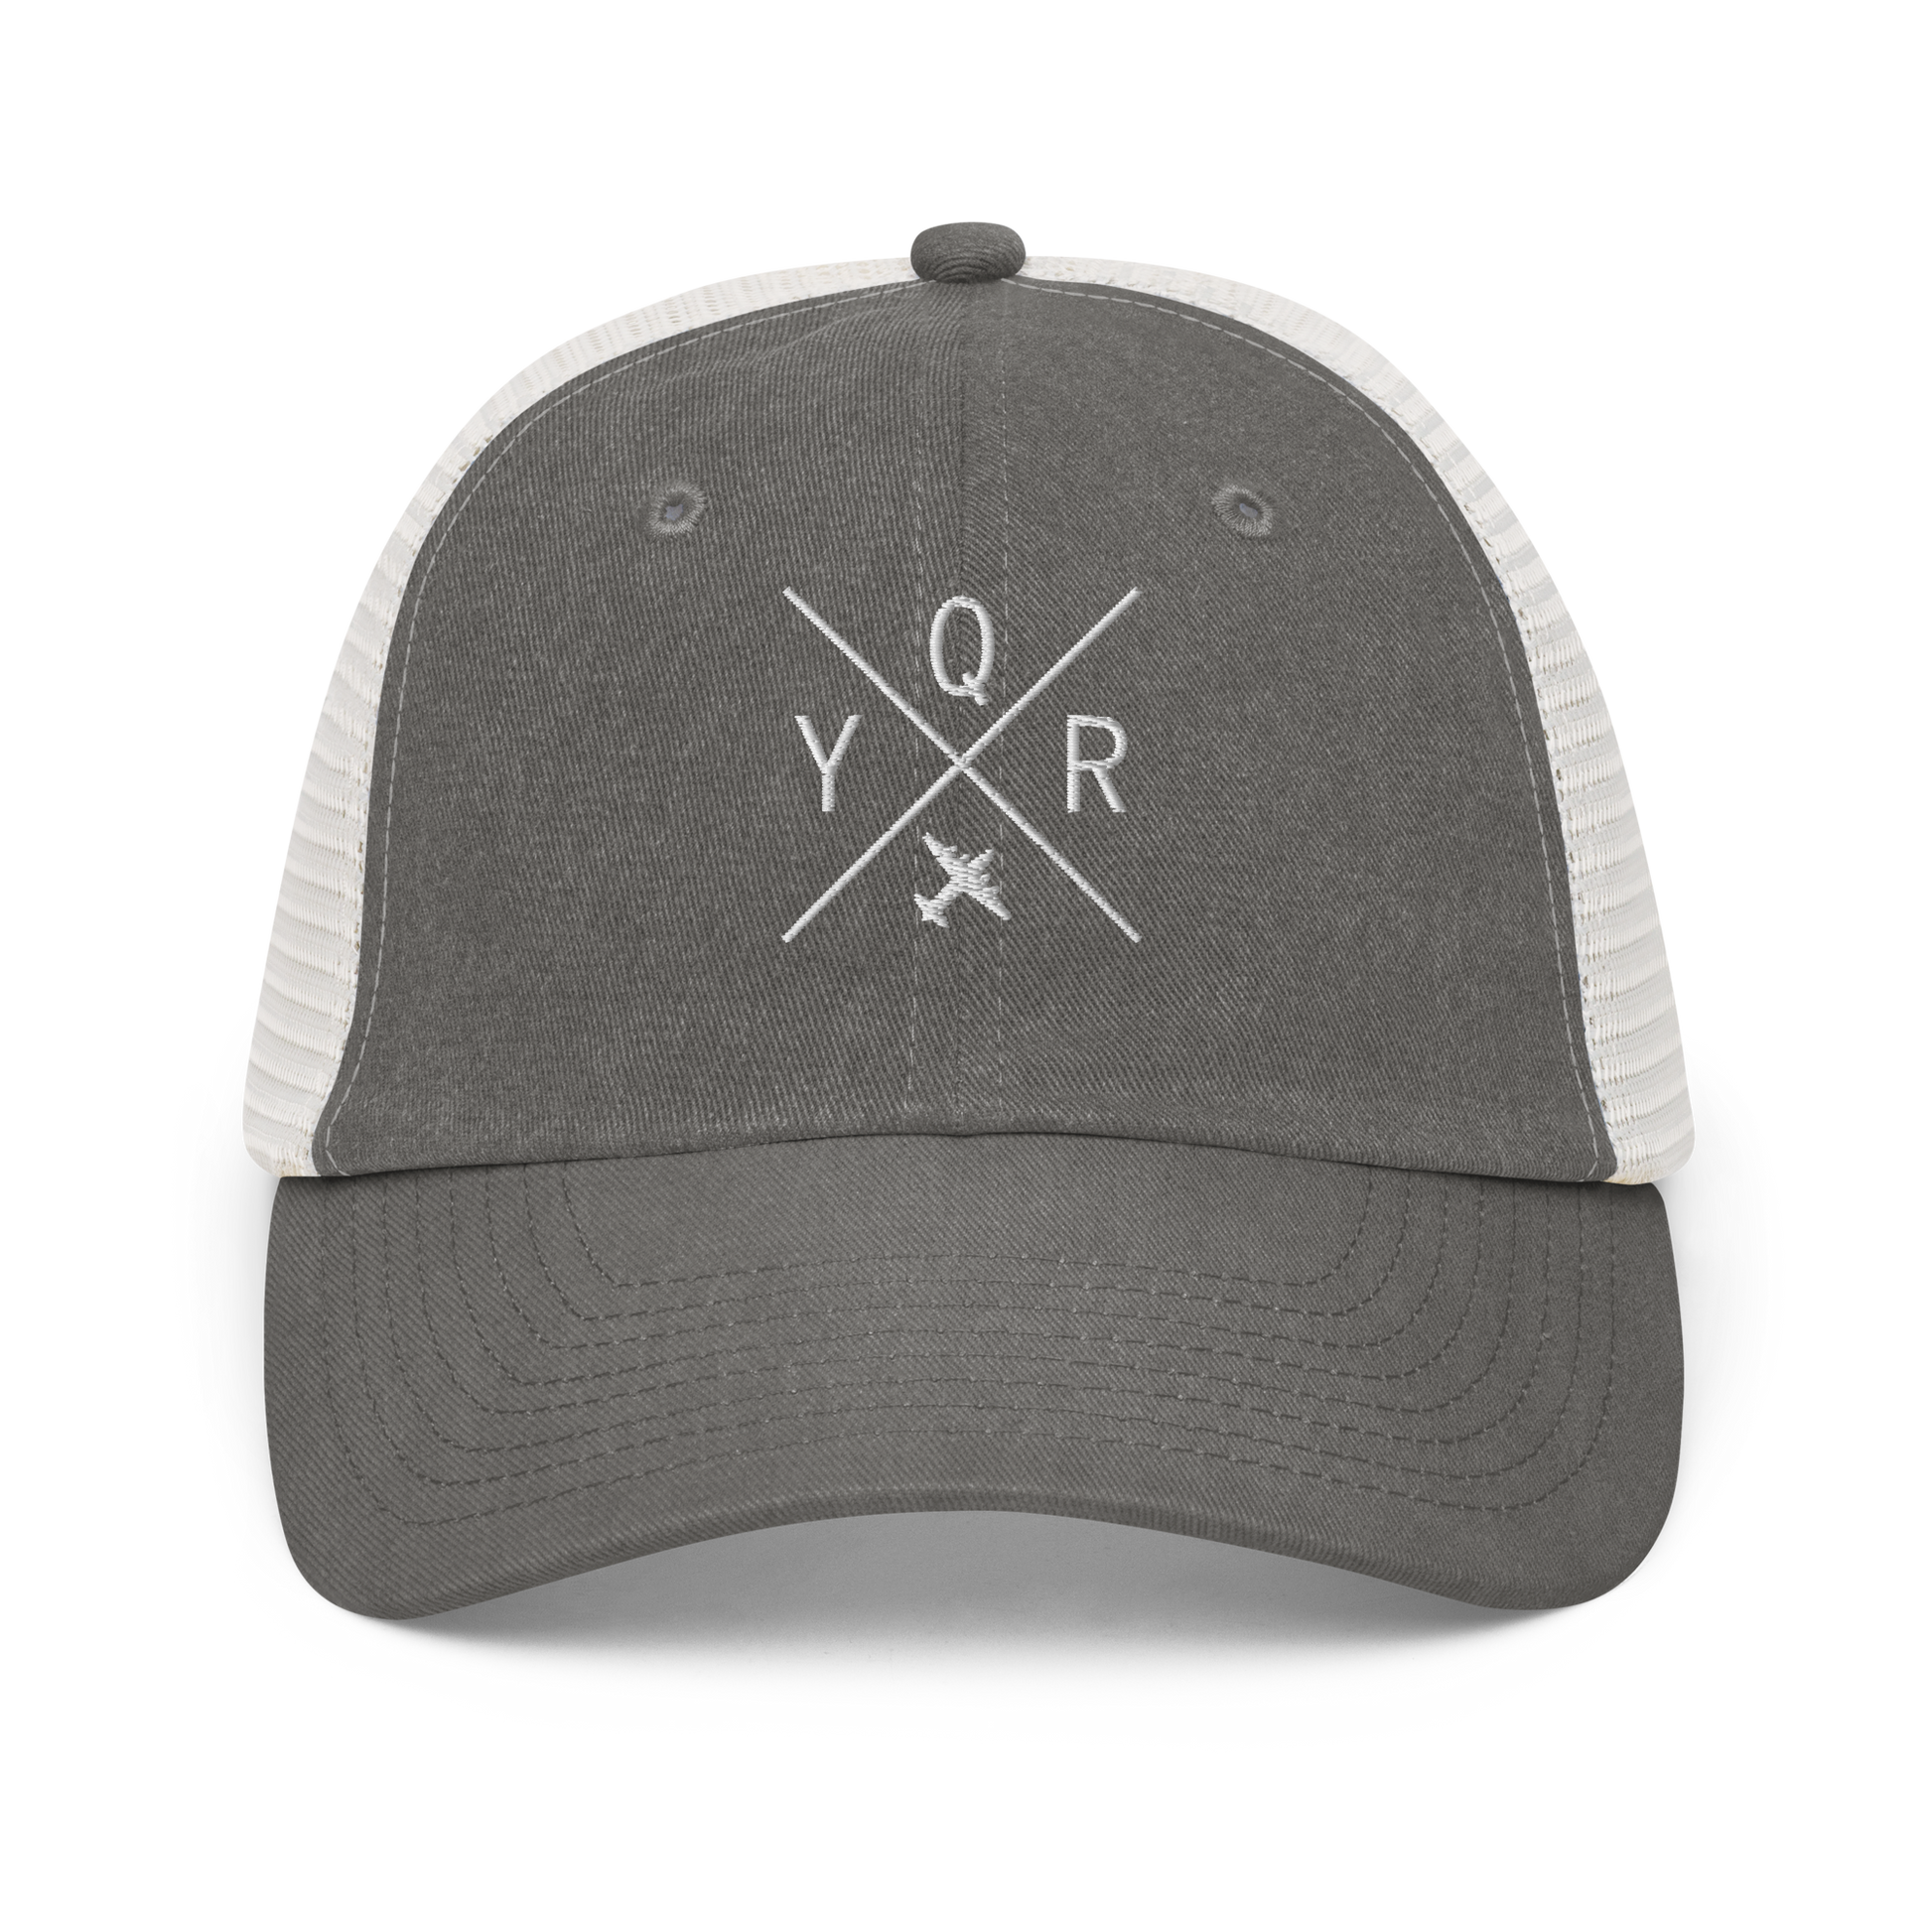 YHM Designs - YQR Regina Pigment-Dyed Trucker Cap - Crossed-X Design with Airport Code and Vintage Propliner - White Embroidery - Image 09